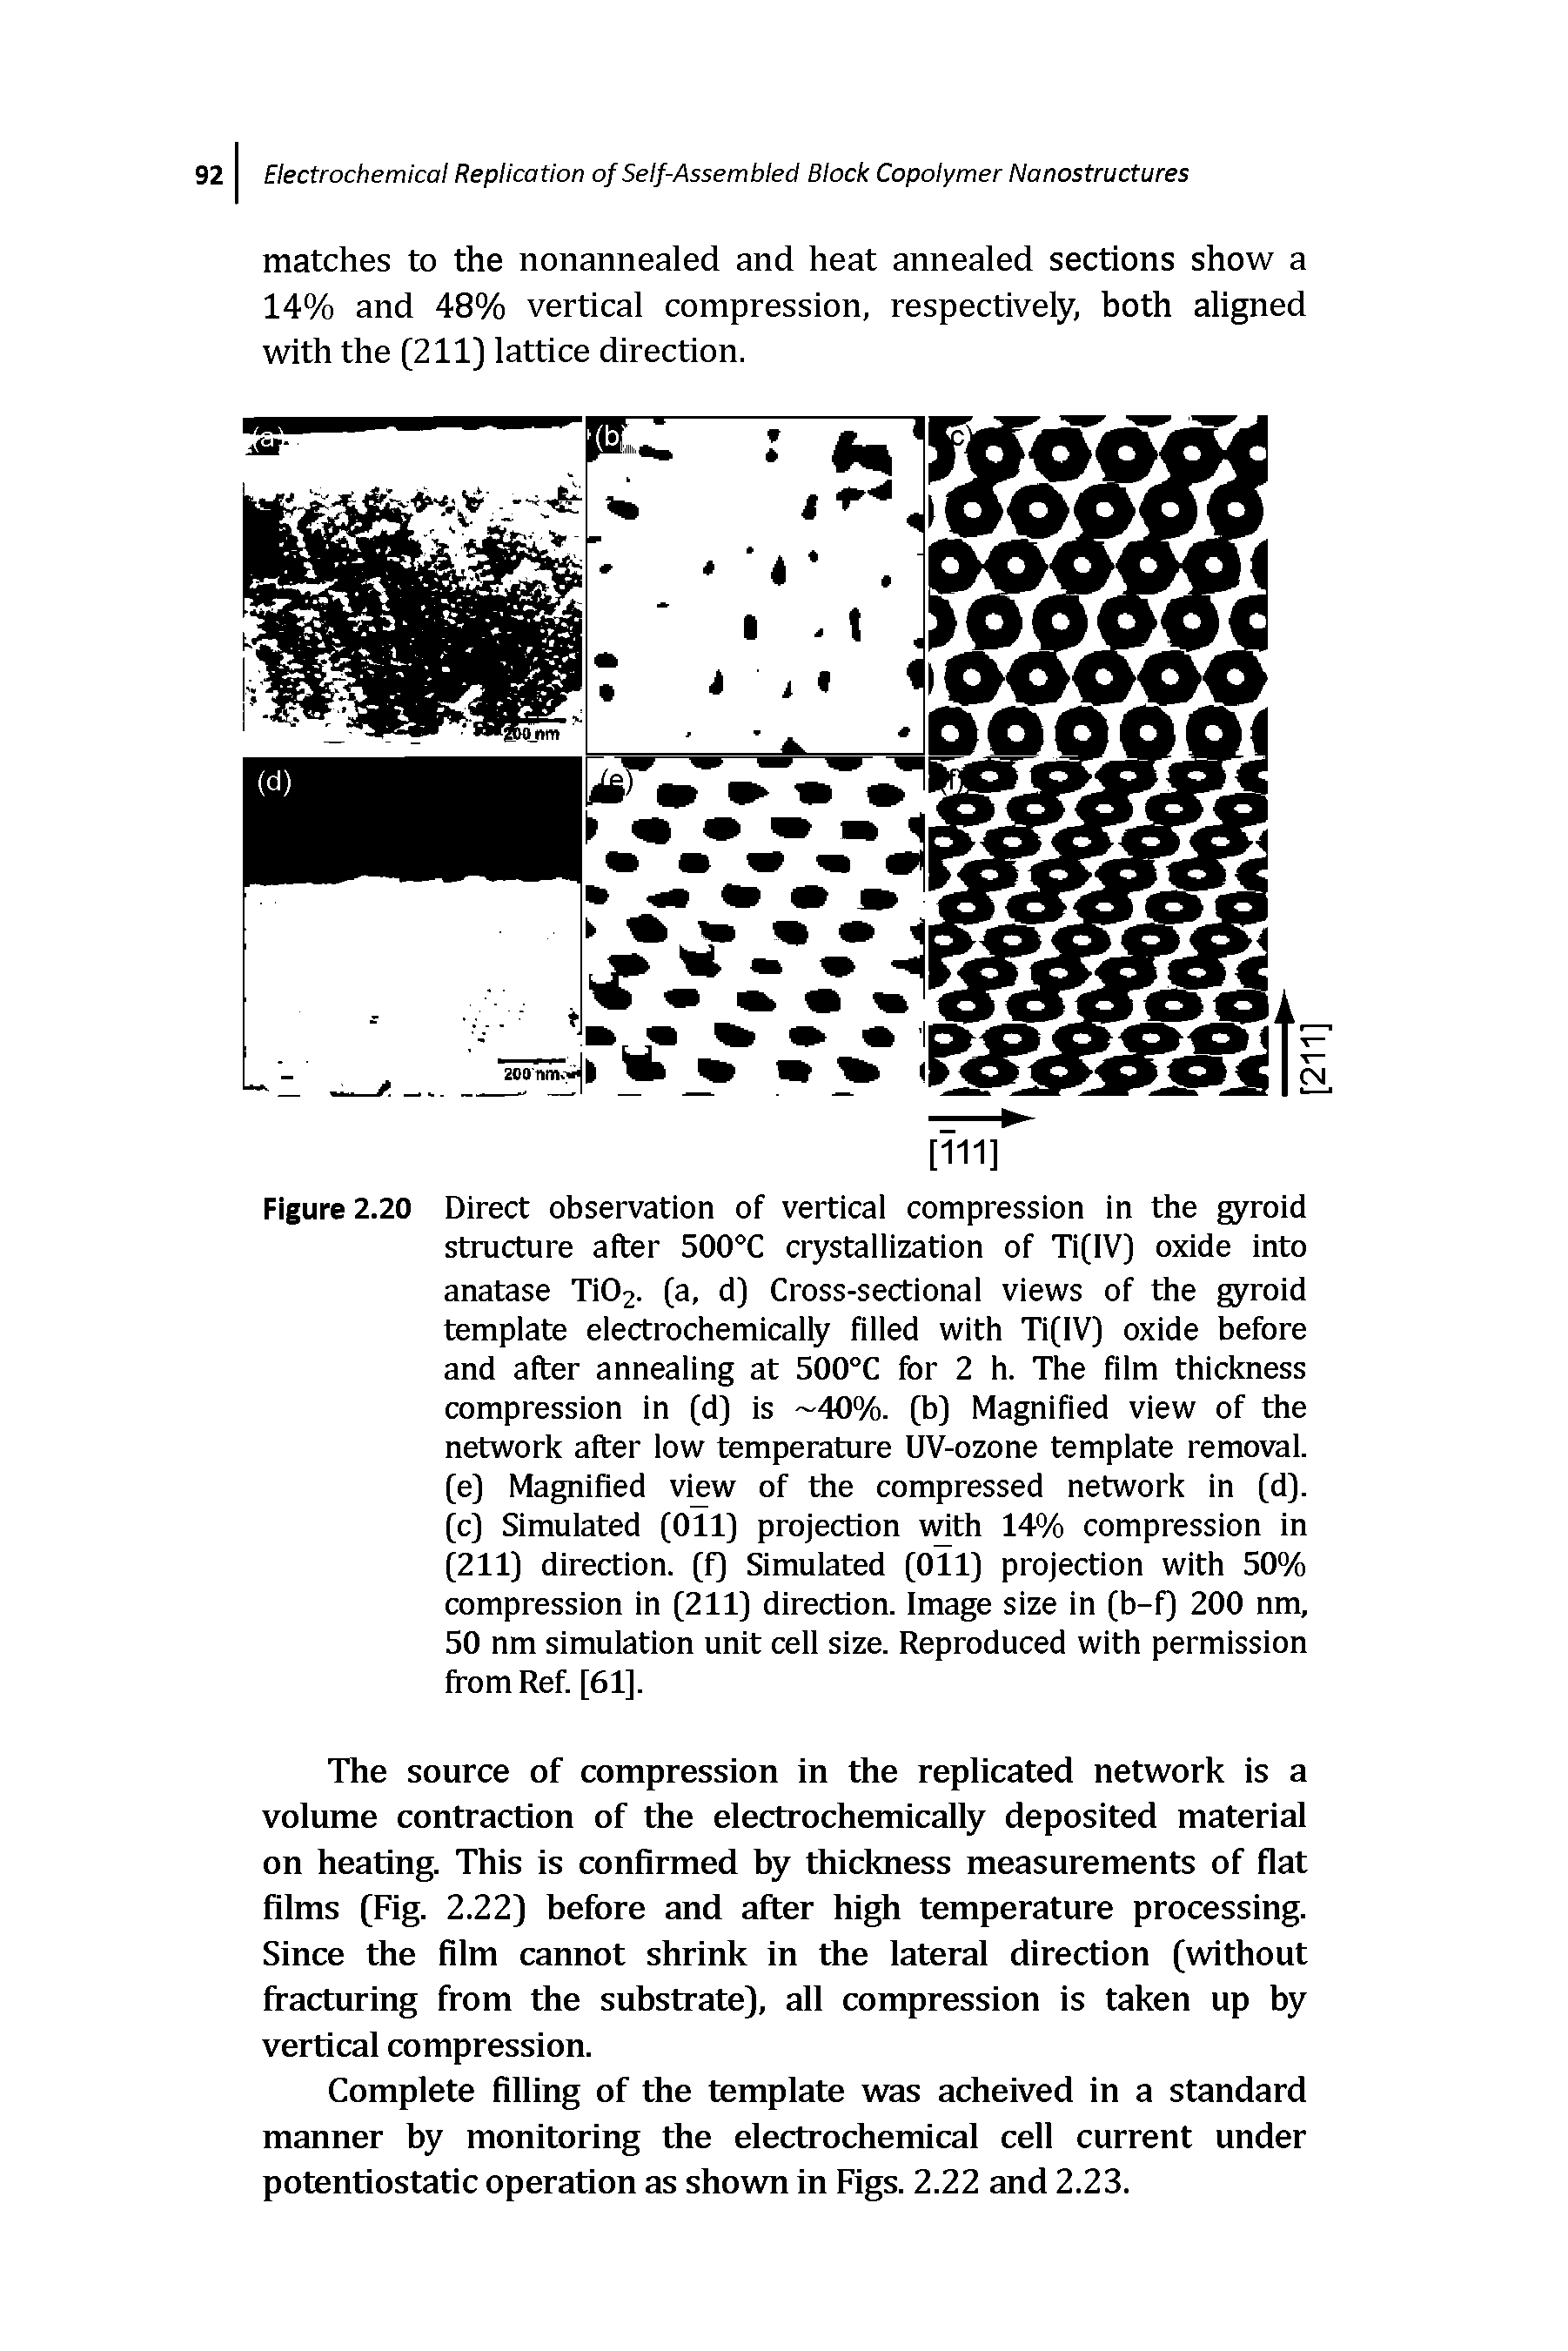 Figure 2.20 Direct observation of vertical compression in the gyroid structure after 500°C crystallization of Ti(lV) oxide into anatase Ti02- (a, d) Cross-sectional views of the gyroid template electrochemically filled with Ti(lV) oxide before and after annealing at 500°C for 2 h. The film thickness compression in (d) is 40%. (b) Magnified view of the network after low temperature UV-ozone template removal, (e) Magnified view of the compressed network in (d). (c) Simulated (Oil) projection with 14% compression in (211) direction, (f) Simulated (Oil) projection with 50% compression in (211) direction. Image size in (b-f) 200 nm, 50 nm simulation unit cell size. Reproduced with permission from Ref. [61].